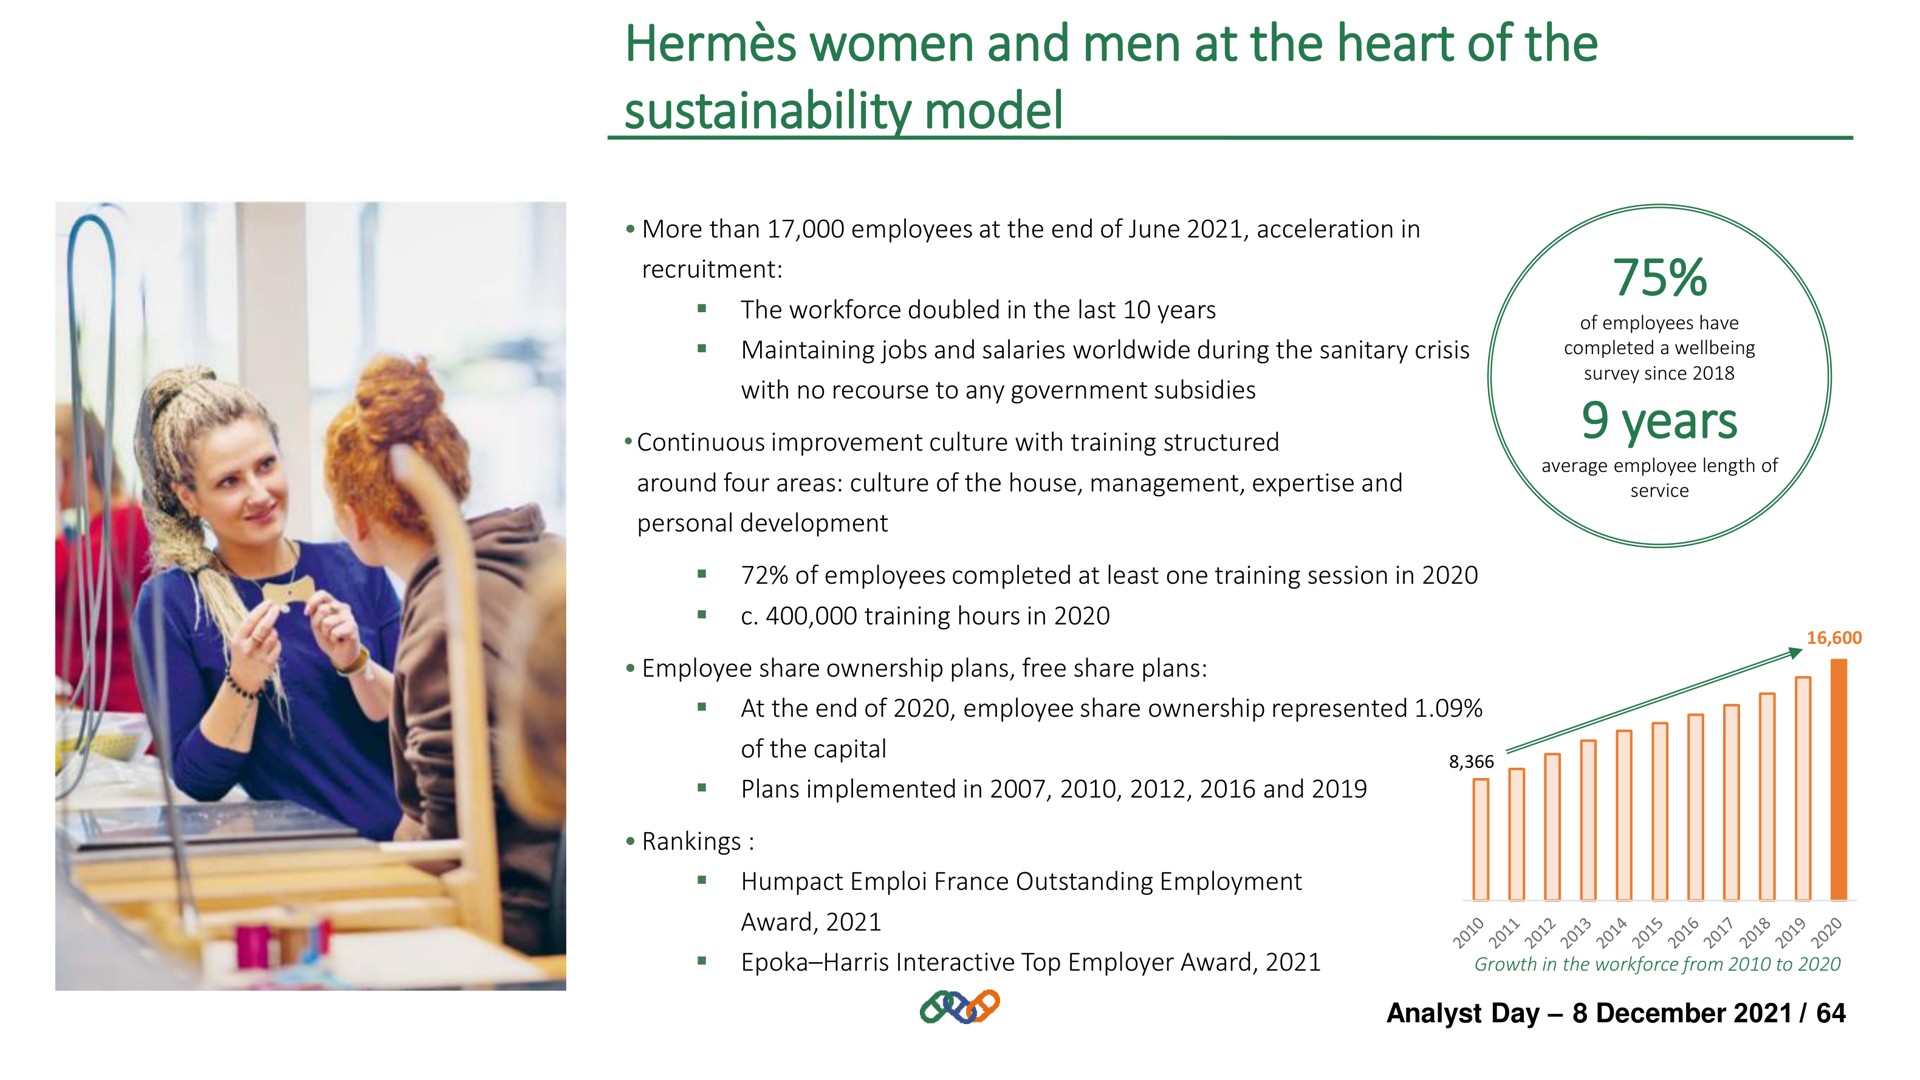 women and men at the heart of the model years | Hermes